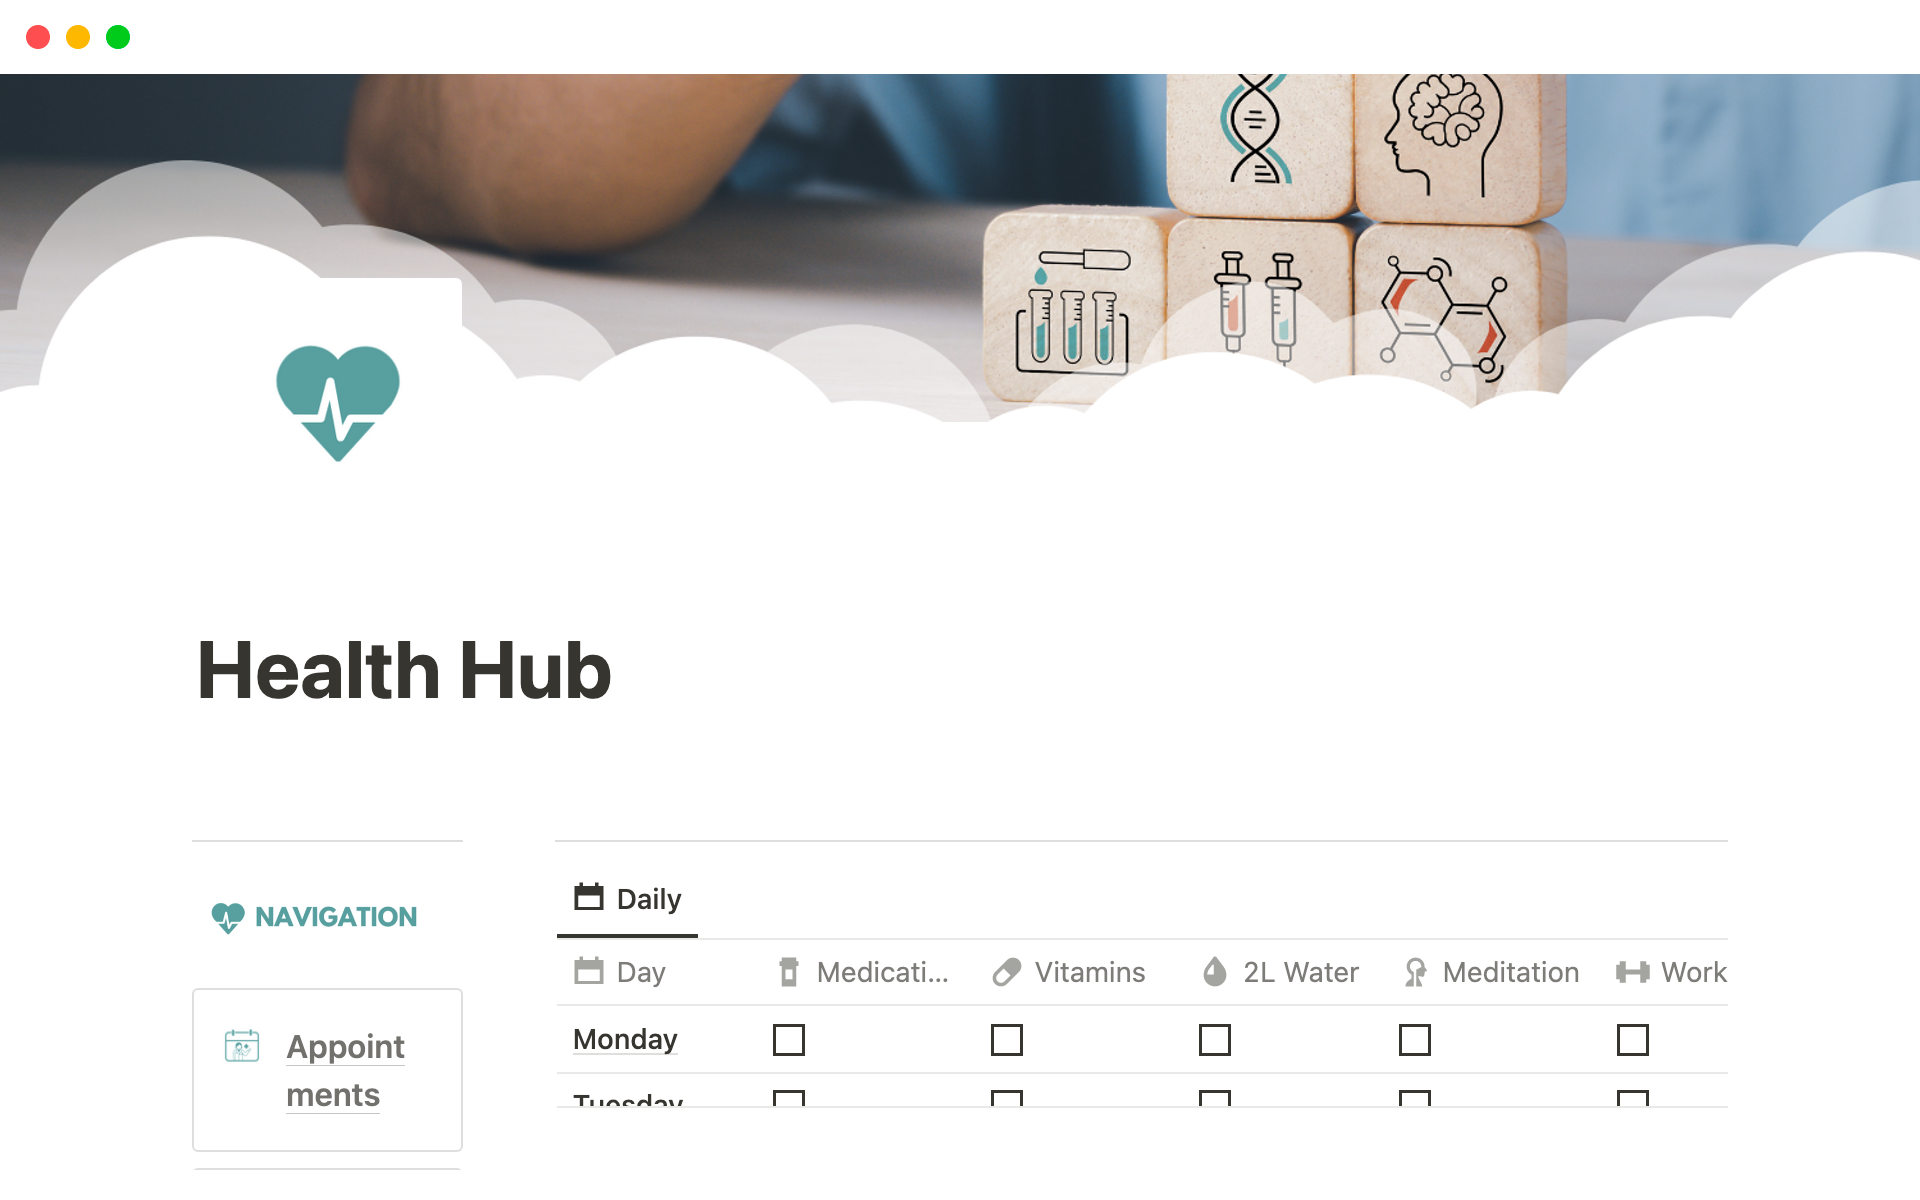 The Health Hub empowers you to make informed decisions, set health goals, track progress, and actively engage in your well-being journey.